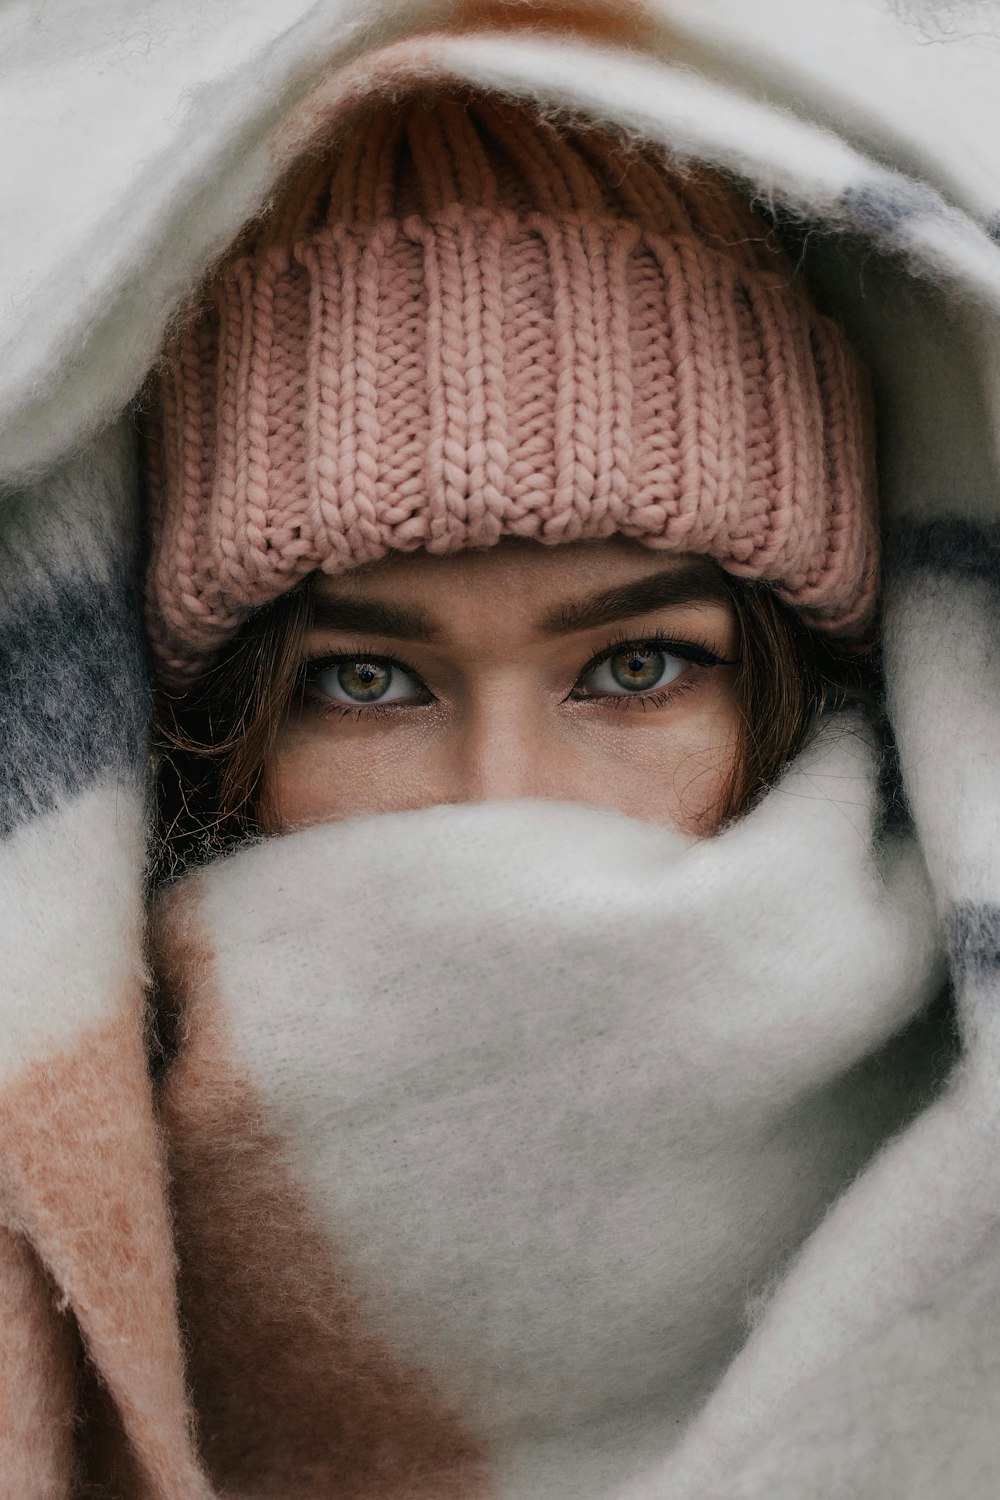 a woman with blue eyes hiding under a blanket